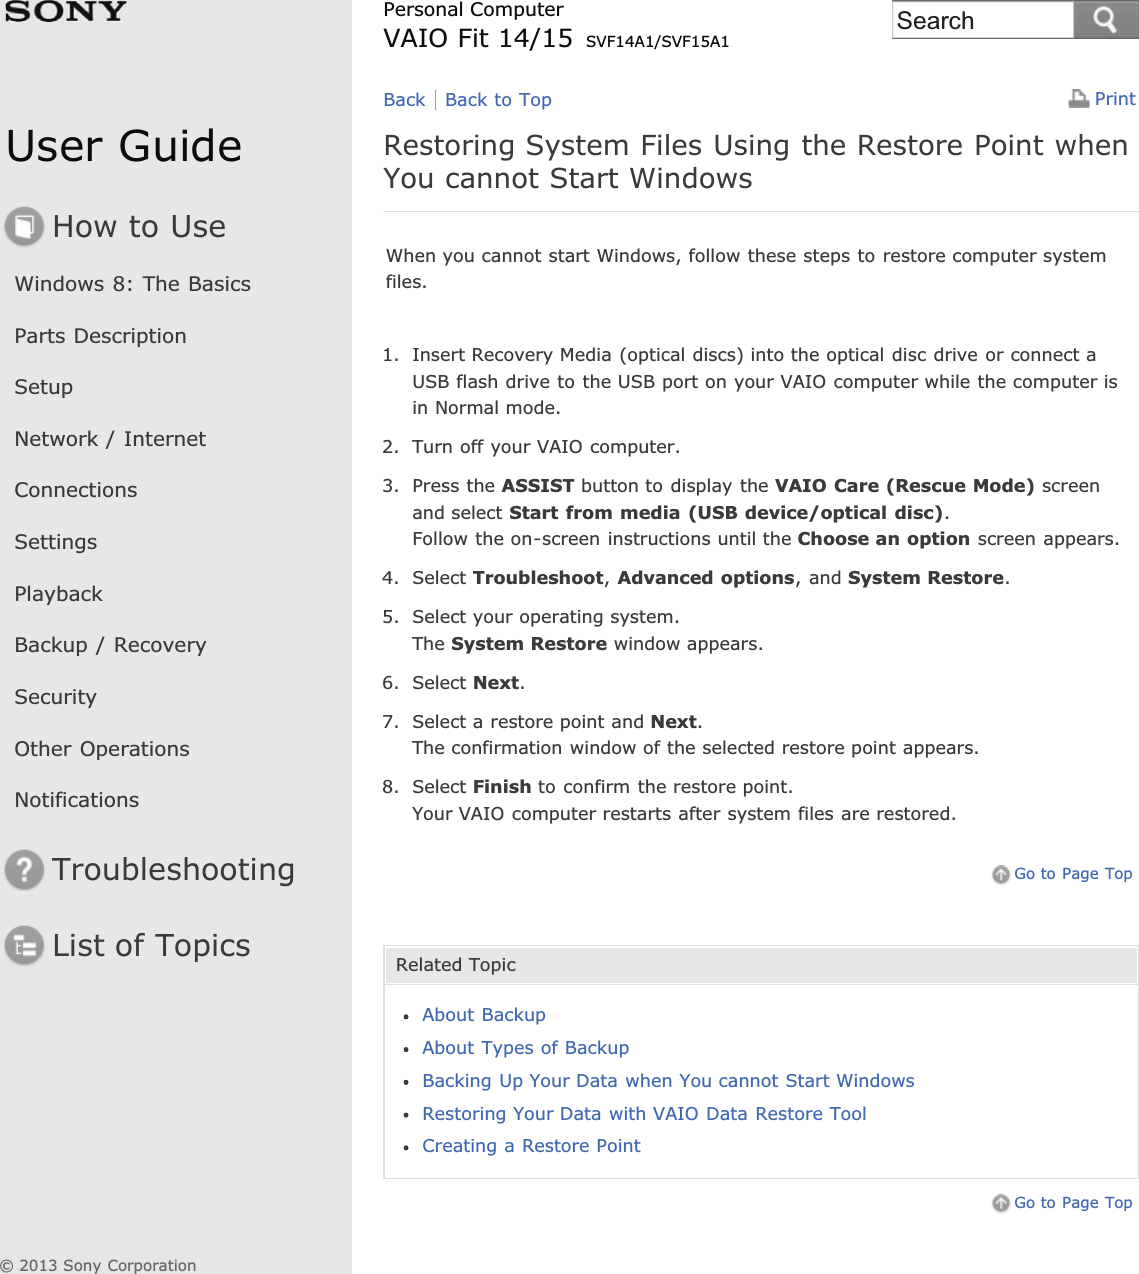 User GuideHow to UseWindows 8: The BasicsParts DescriptionSetupNetwork / InternetConnectionsSettingsPlaybackBackup / RecoverySecurityOther OperationsNotificationsTroubleshootingList of TopicsPrintPersonal ComputerVAIO Fit 14/15 SVF14A1/SVF15A1Restoring System Files Using the Restore Point whenYou cannot Start WindowsWhen you cannot start Windows, follow these steps to restore computer systemfiles.1. Insert Recovery Media (optical discs) into the optical disc drive or connect aUSB flash drive to the USB port on your VAIO computer while the computer isin Normal mode.2. Turn off your VAIO computer.3. Press the ASSIST button to display the VAIO Care (Rescue Mode) screenand select Start from media (USB device/optical disc).Follow the on-screen instructions until the Choose an option screen appears.4. Select Troubleshoot,Advanced options, and System Restore.5. Select your operating system.The System Restore window appears.6. Select Next.7. Select a restore point and Next.The confirmation window of the selected restore point appears.8. Select Finish to confirm the restore point.Your VAIO computer restarts after system files are restored.Go to Page TopRelated TopicAbout BackupAbout Types of BackupBacking Up Your Data when You cannot Start WindowsRestoring Your Data with VAIO Data Restore ToolCreating a Restore PointGo to Page TopBack Back to Top© 2013 Sony CorporationSearch